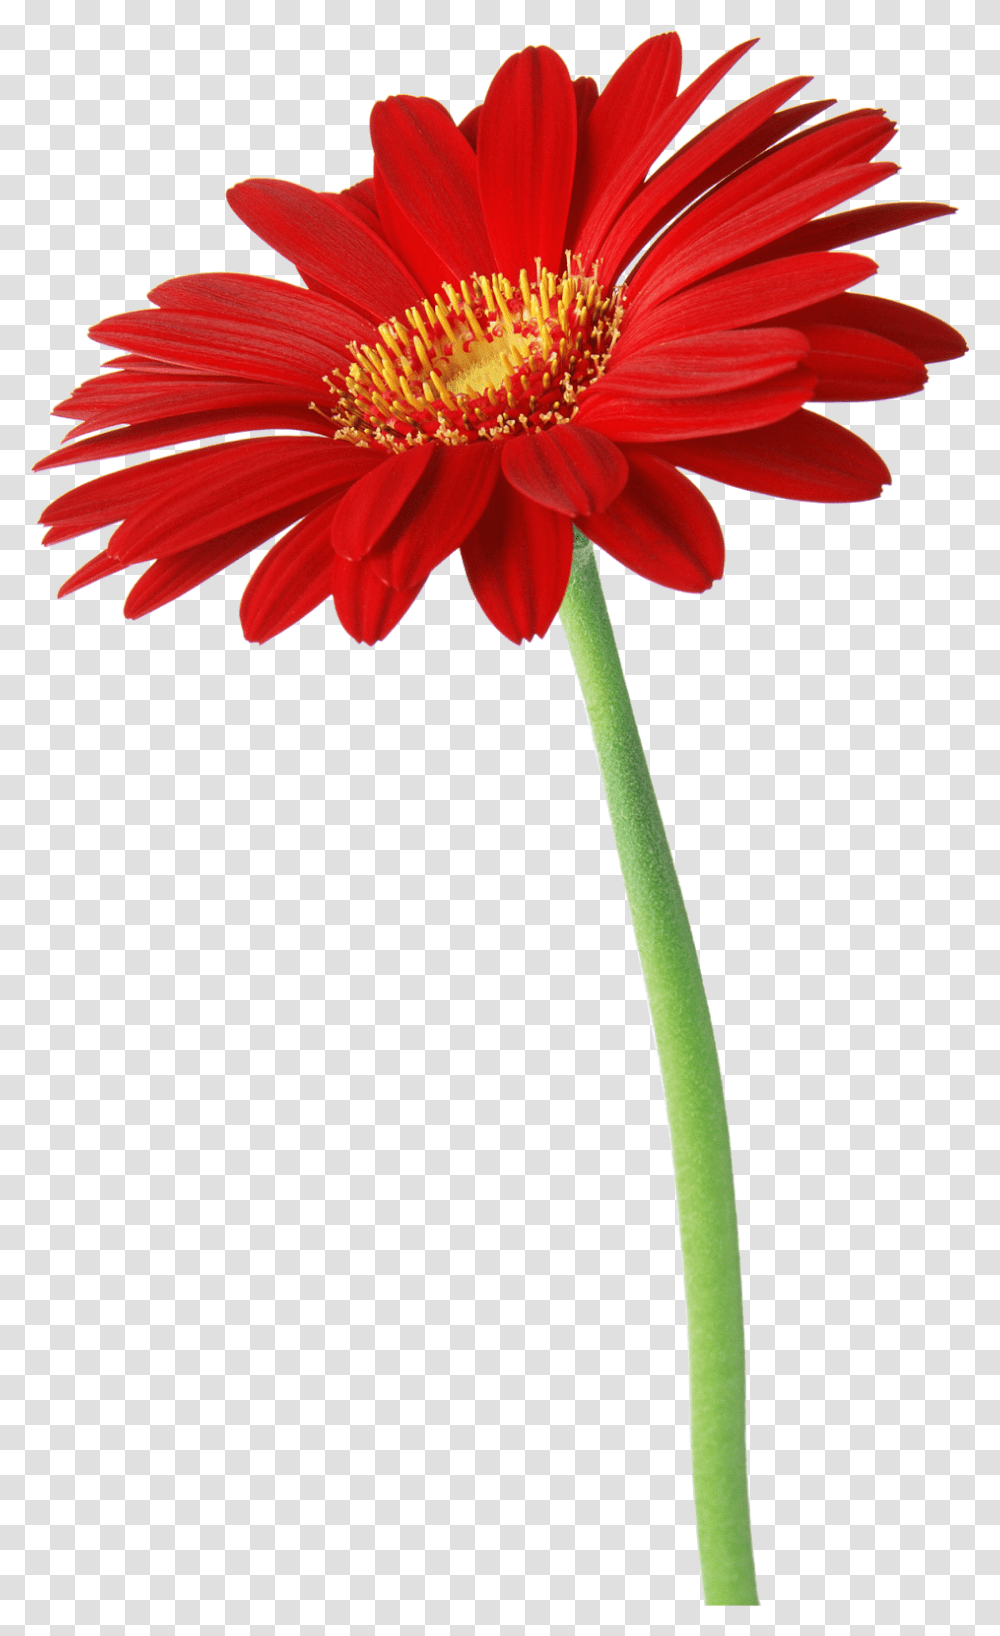 Flower Clipart Natural Shrubs Free Leaves Image Red Daisy, Plant, Daisies, Blossom, Pollen Transparent Png